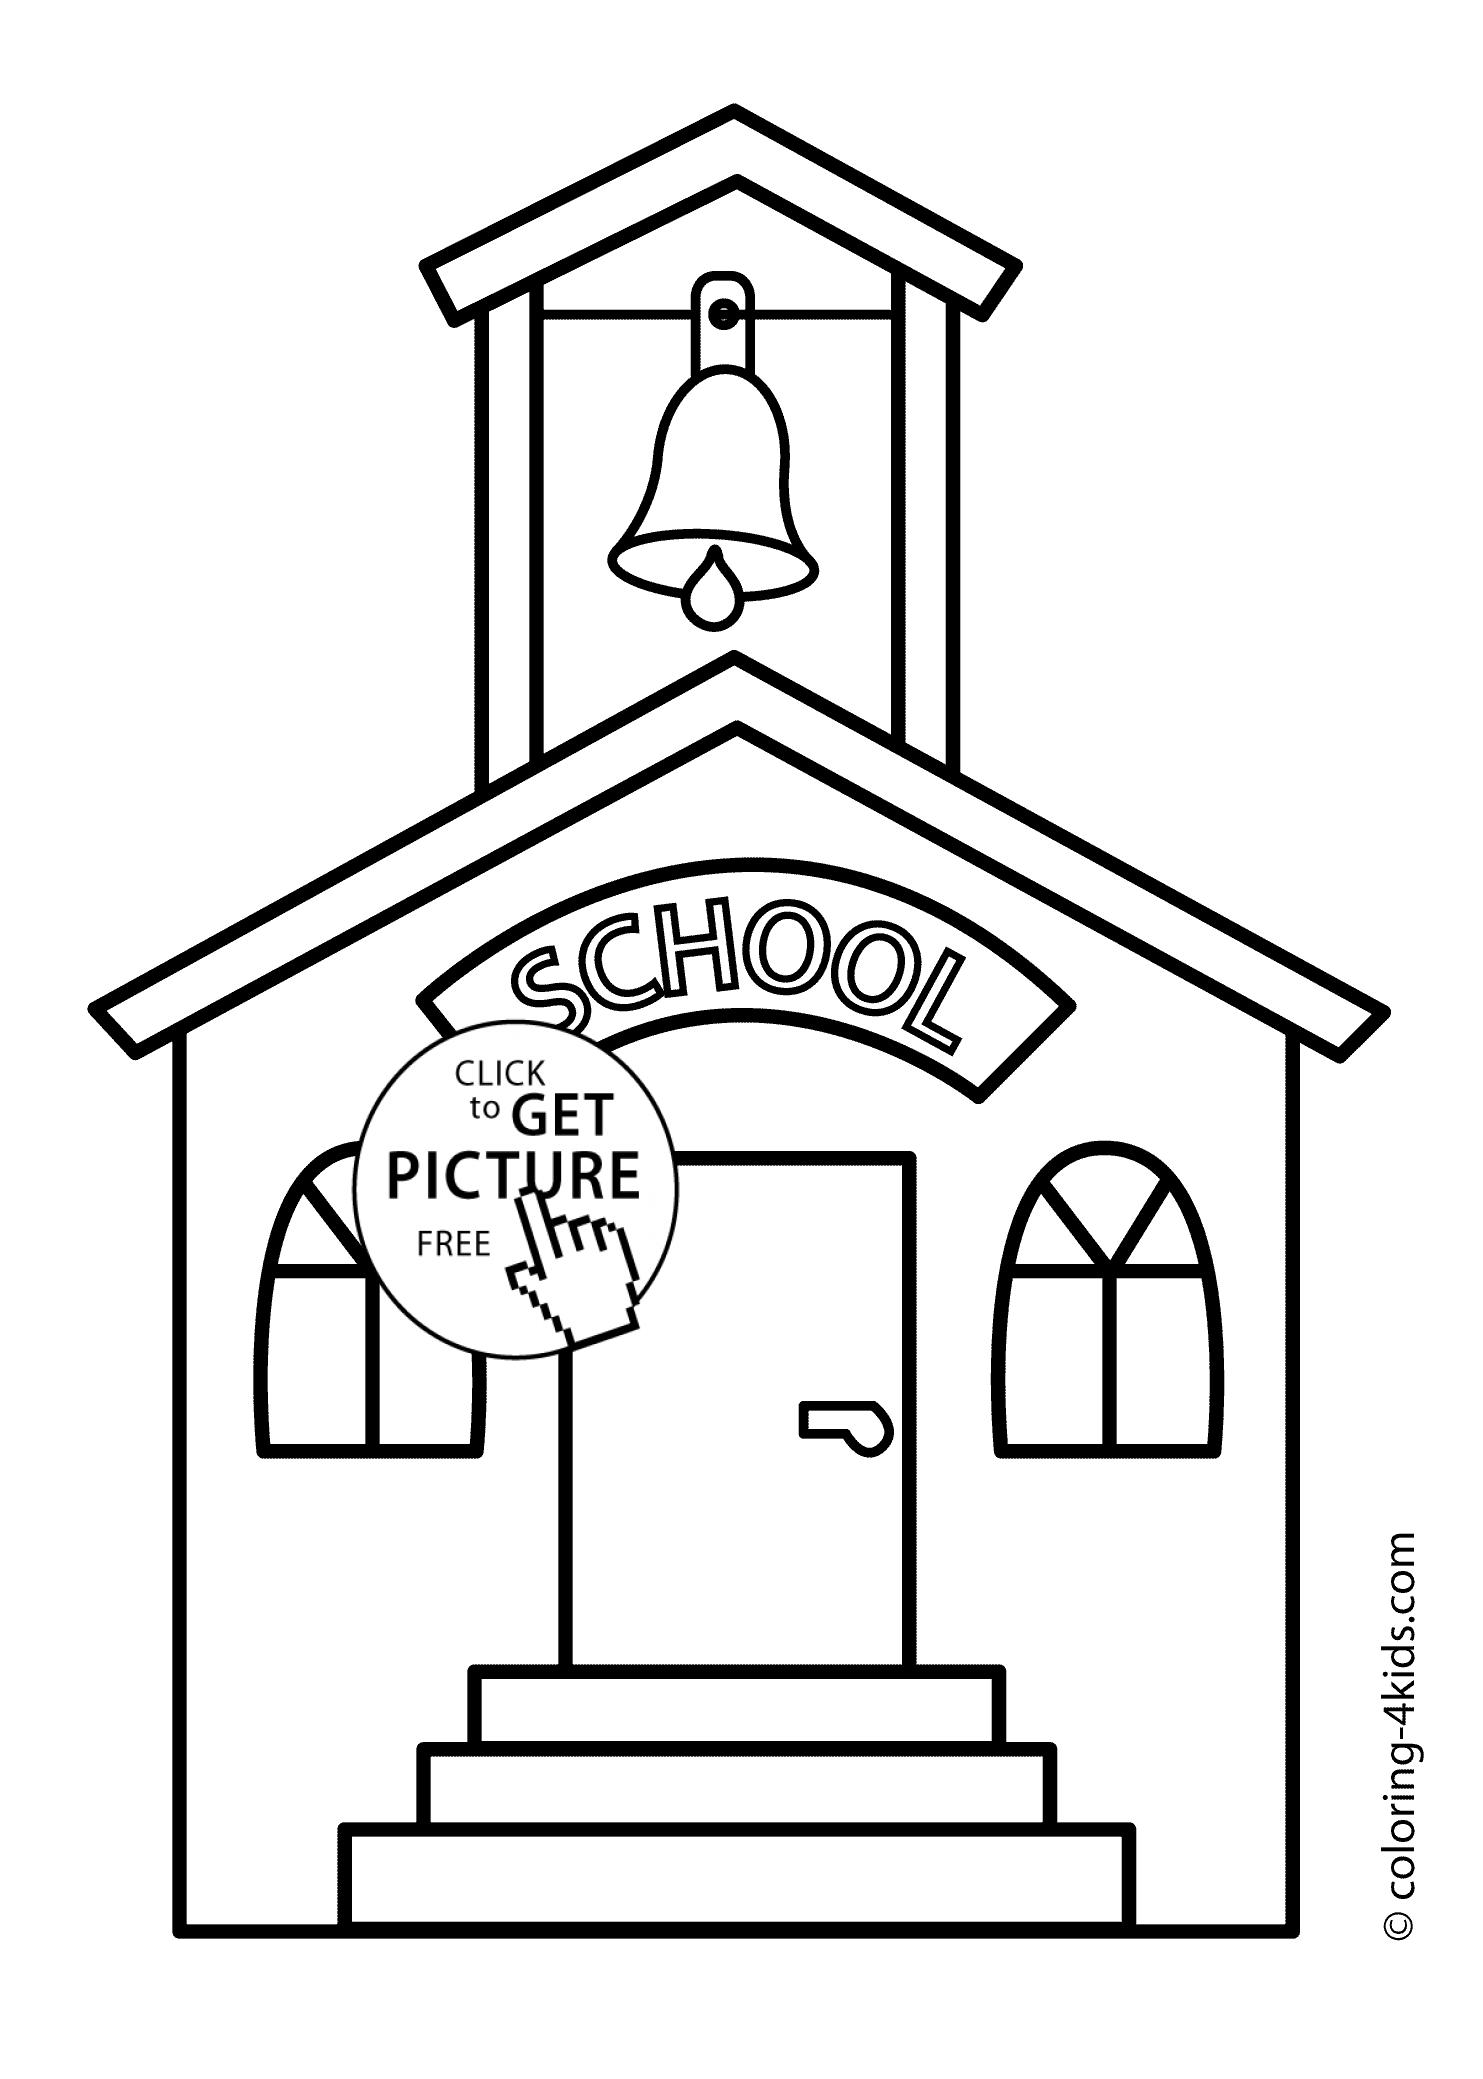 School building coloring page, classes coloring page for ...